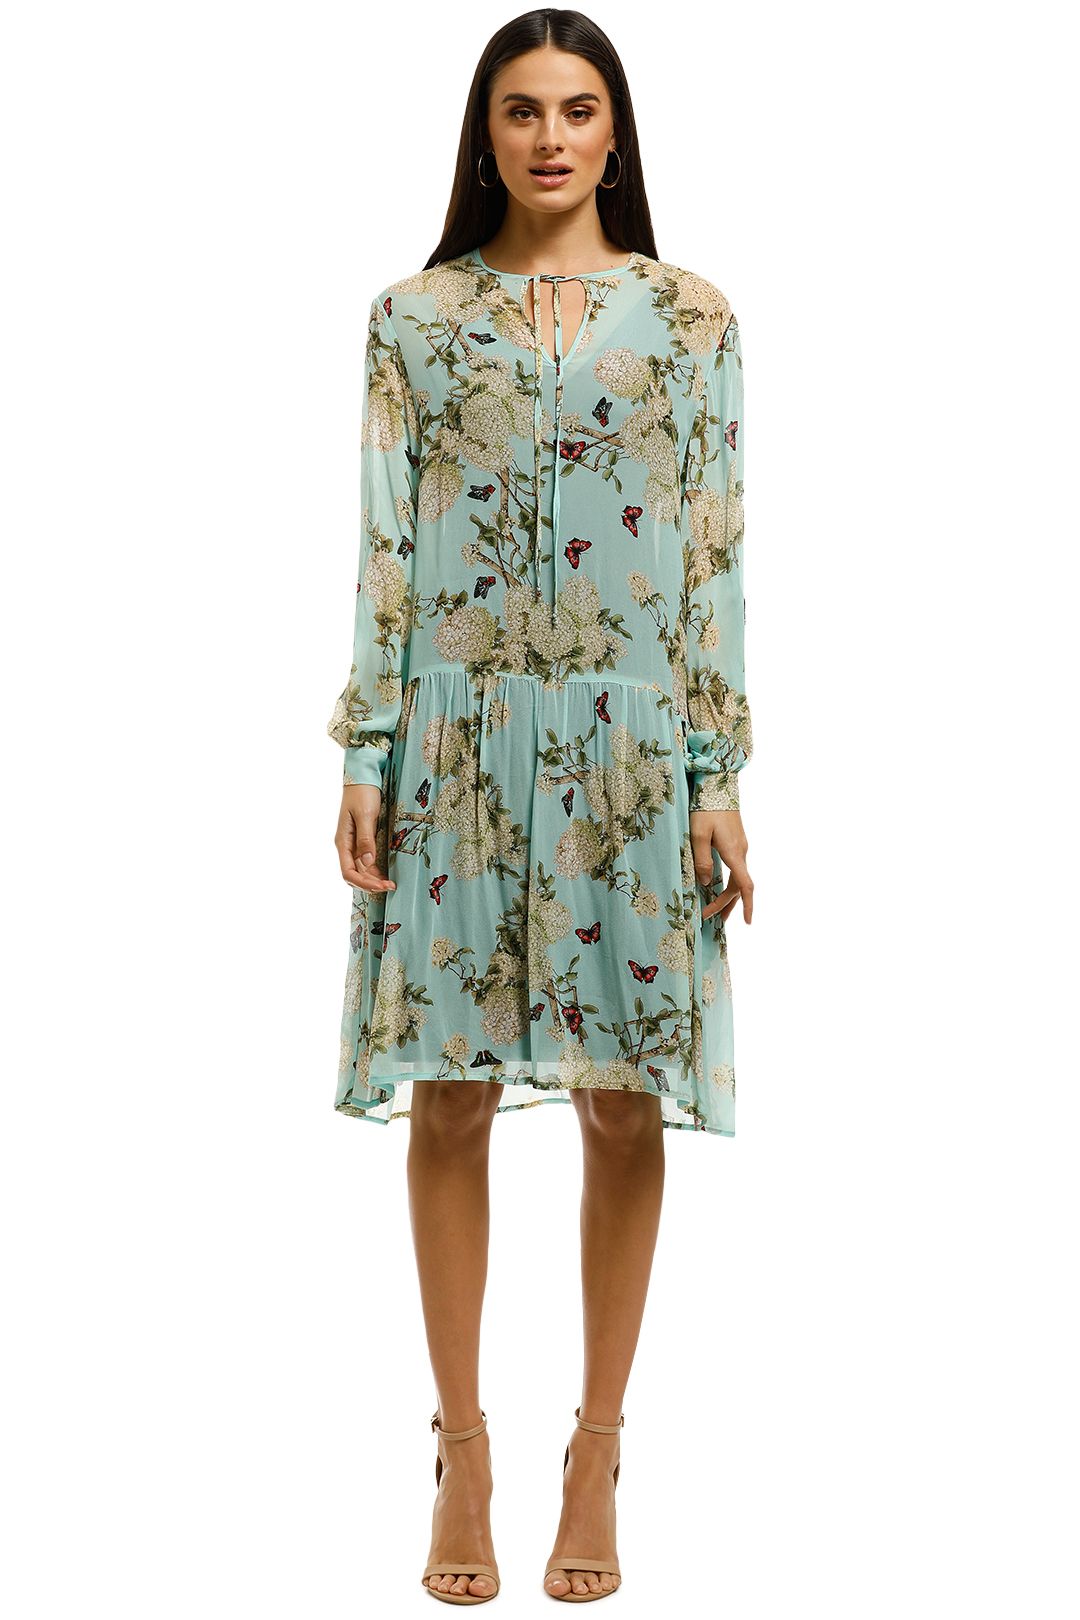 Curate-by-Trelise-Cooper-Tie-Me-Up-Dress-Blue-Floral-Front